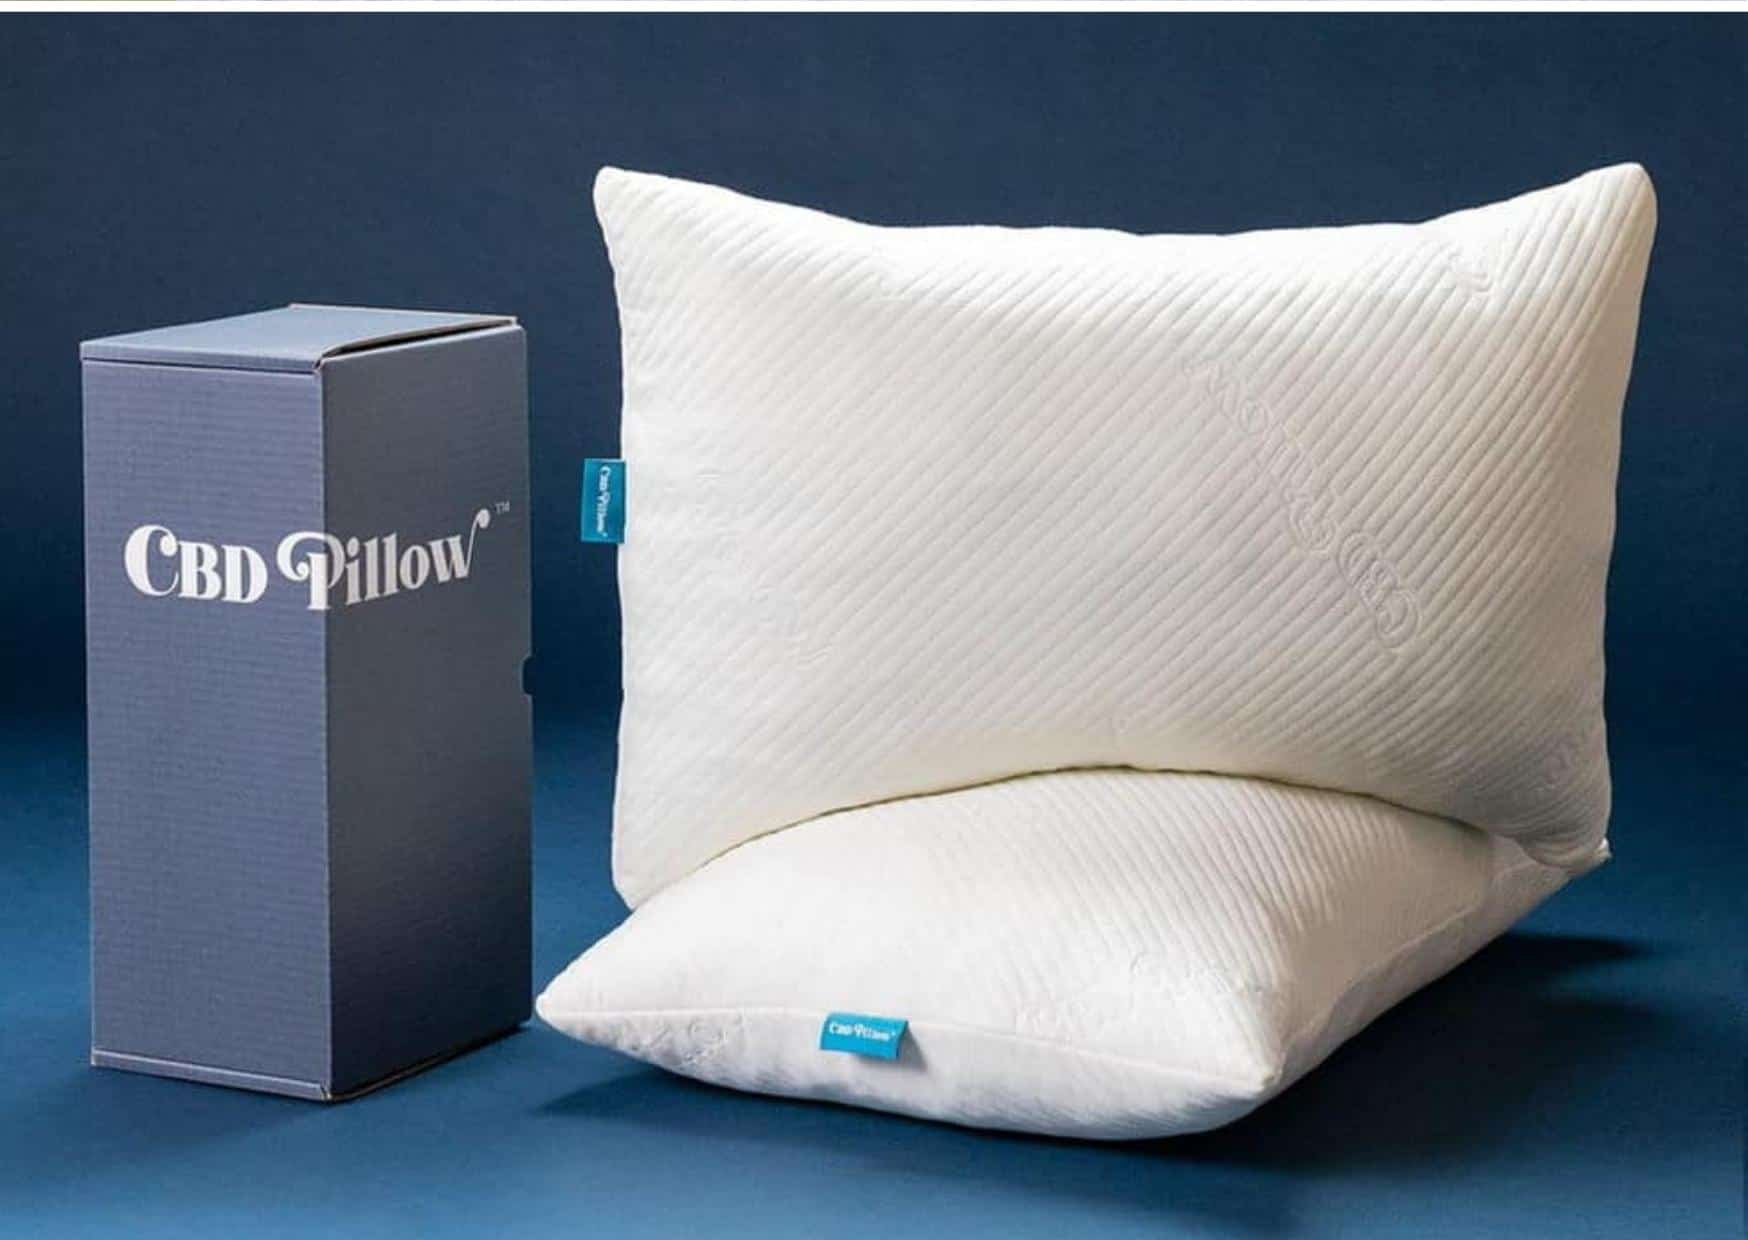 9 best pillows to cuddle your sleep for a great night & # 8217;